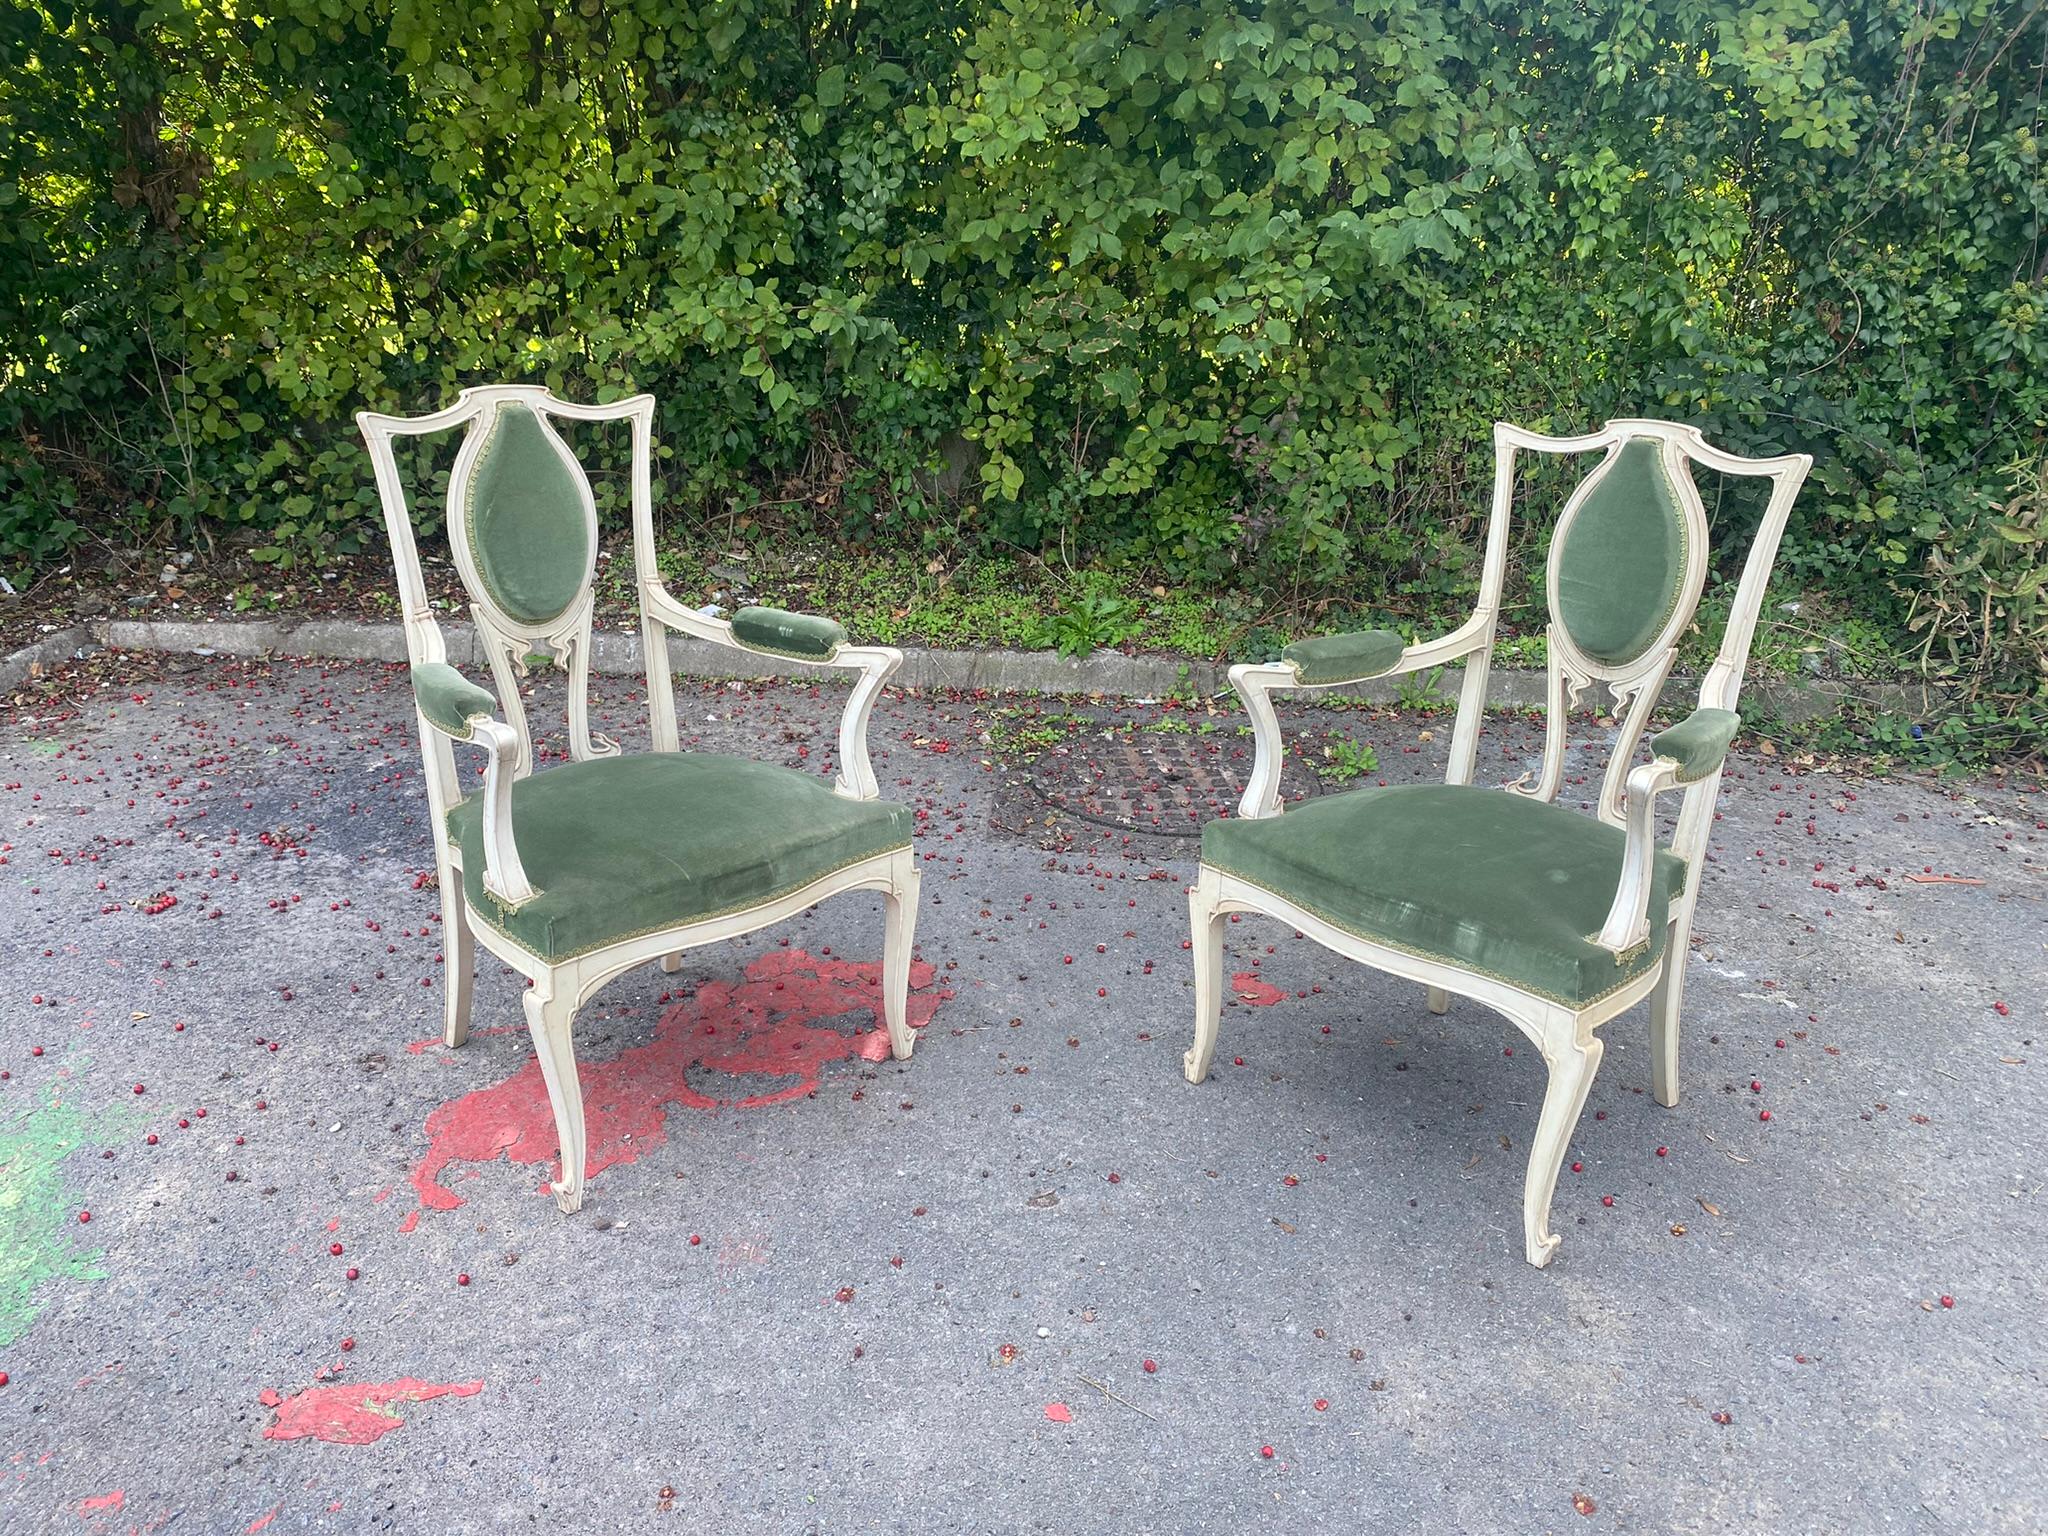 pretty art nouveau living room circa 1900
including 1 bench, 2 armchairs and two chairs.
everything is in good condition, some marks on the velvet, but it can be used immediately
nice patina, elegant movements very 1900.